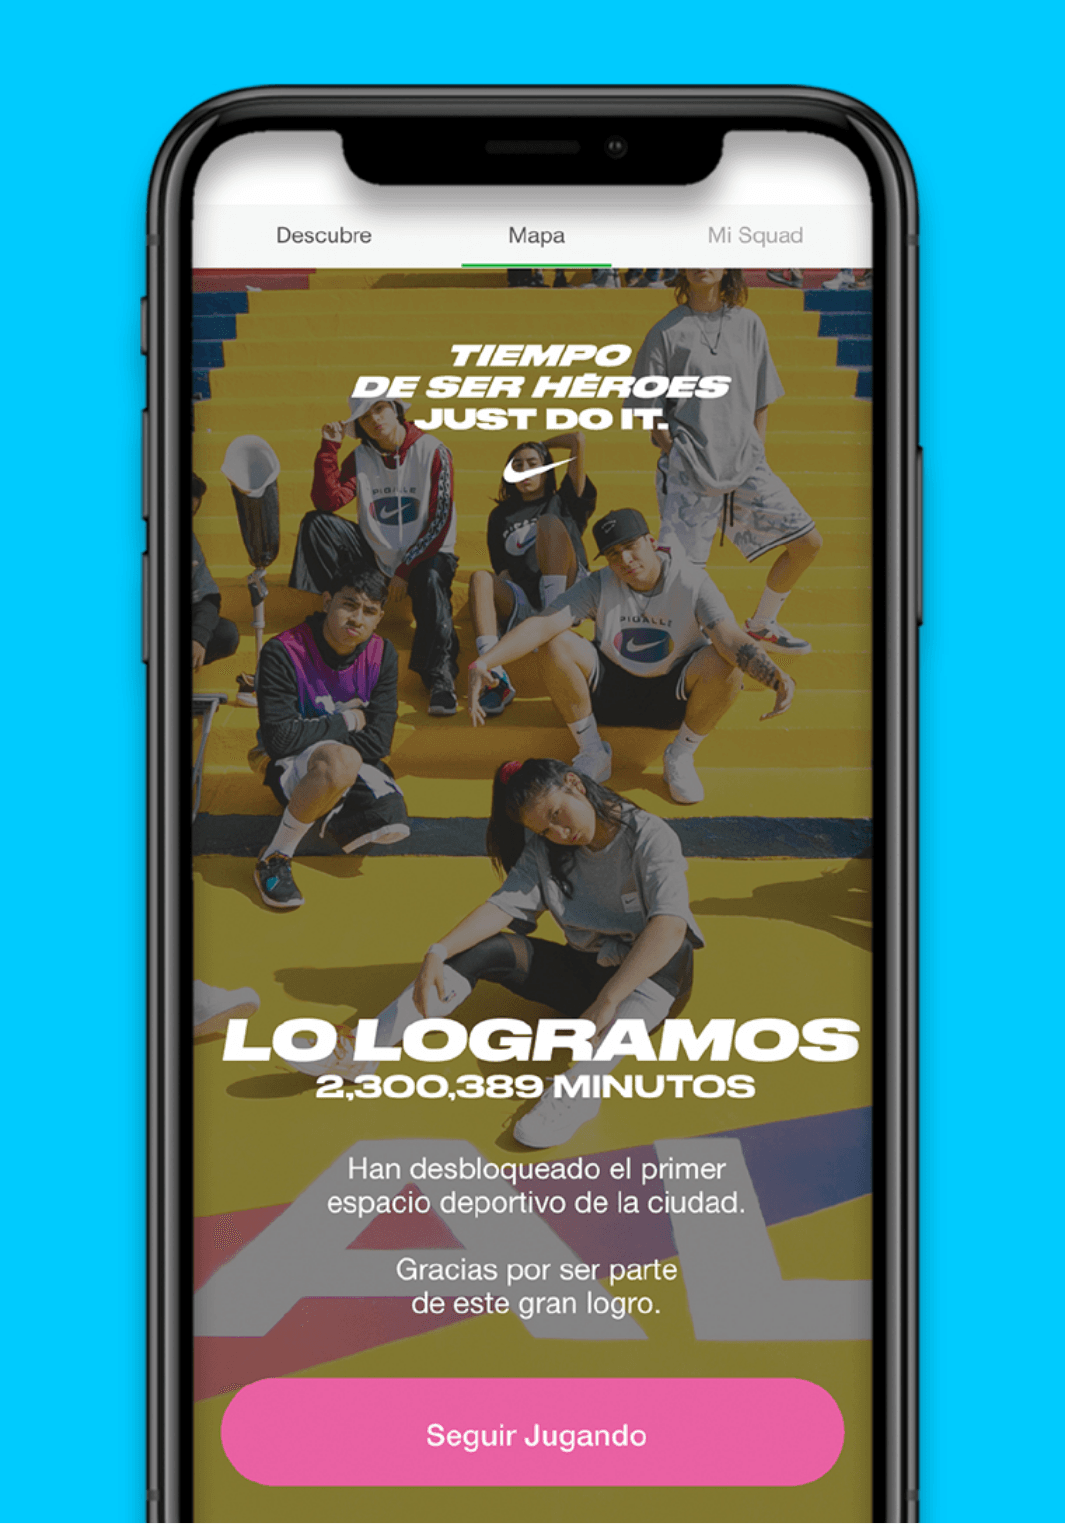 App screen showing several young people sitting on stairs with text Tiempo de ser heroes Just Do It. Lo Logramos 2,300,389 Minutos. Button reads Seguir Jugando